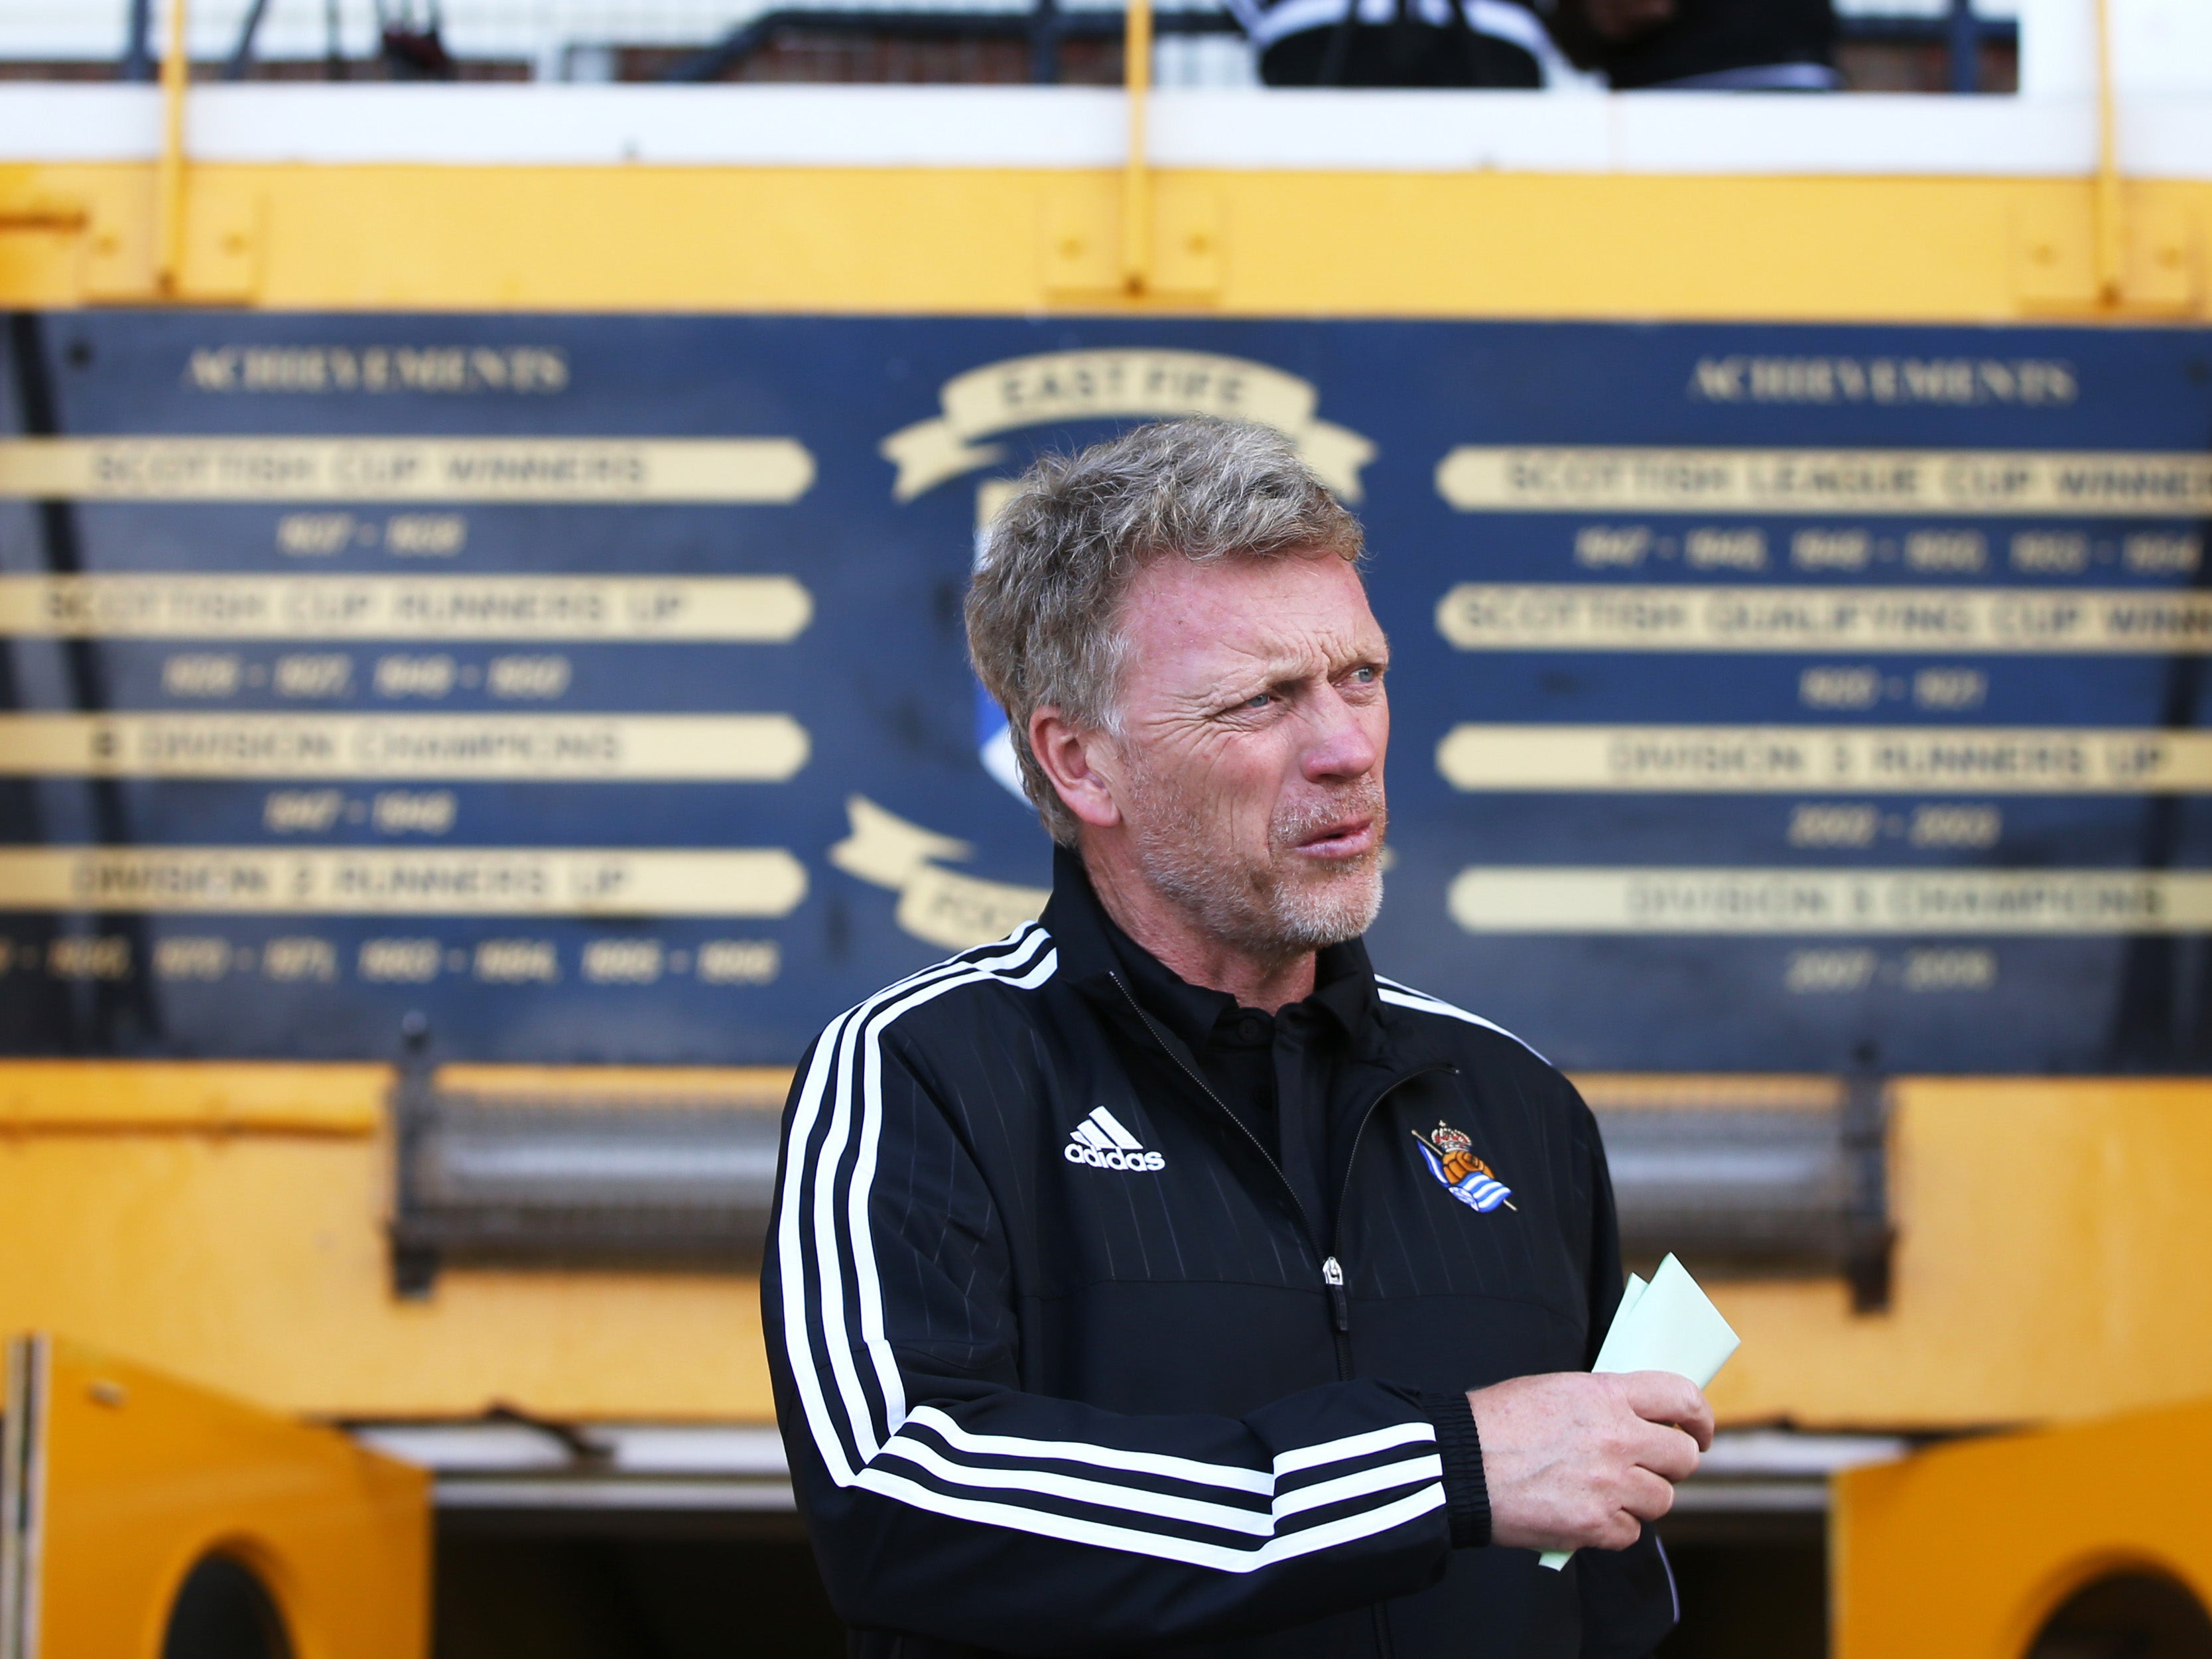 David Moyes has been out of work since leaving Real Sociedad